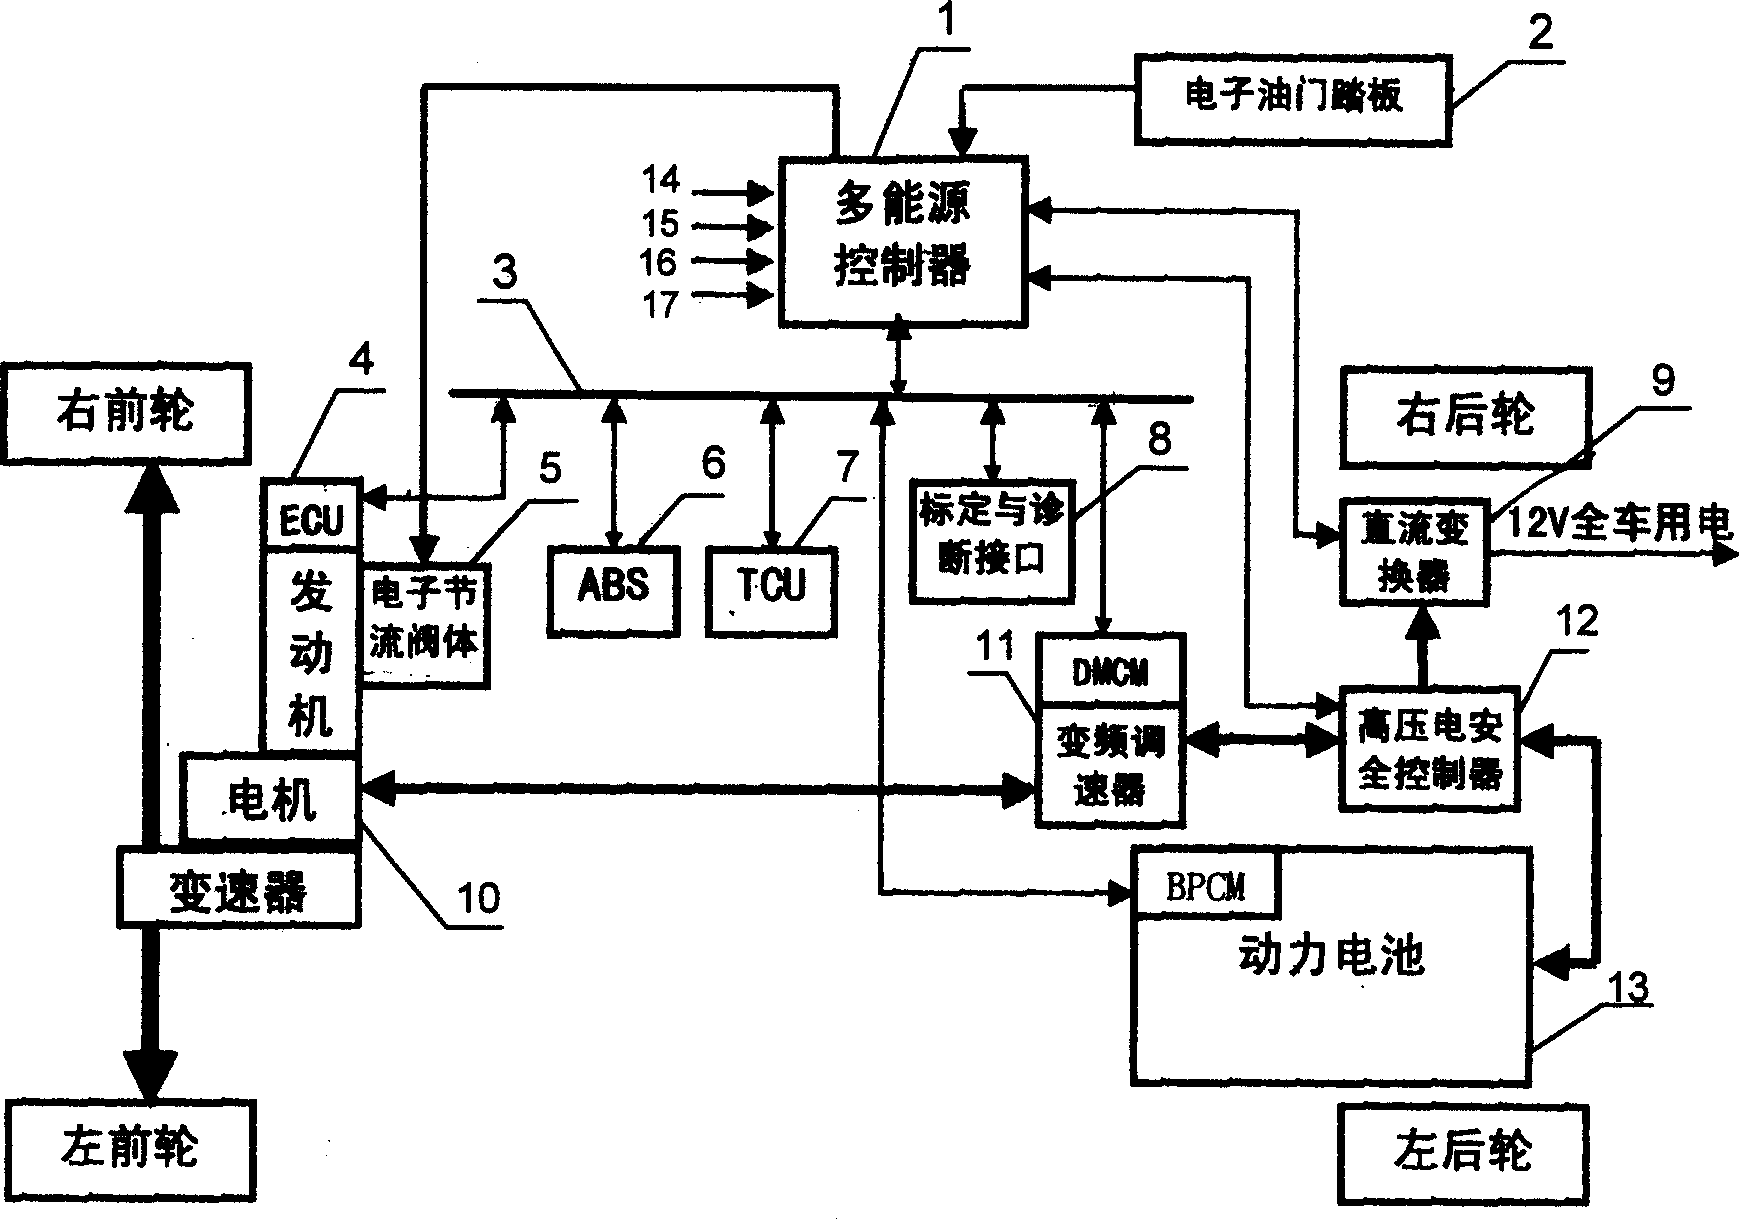 Mixed power car control system